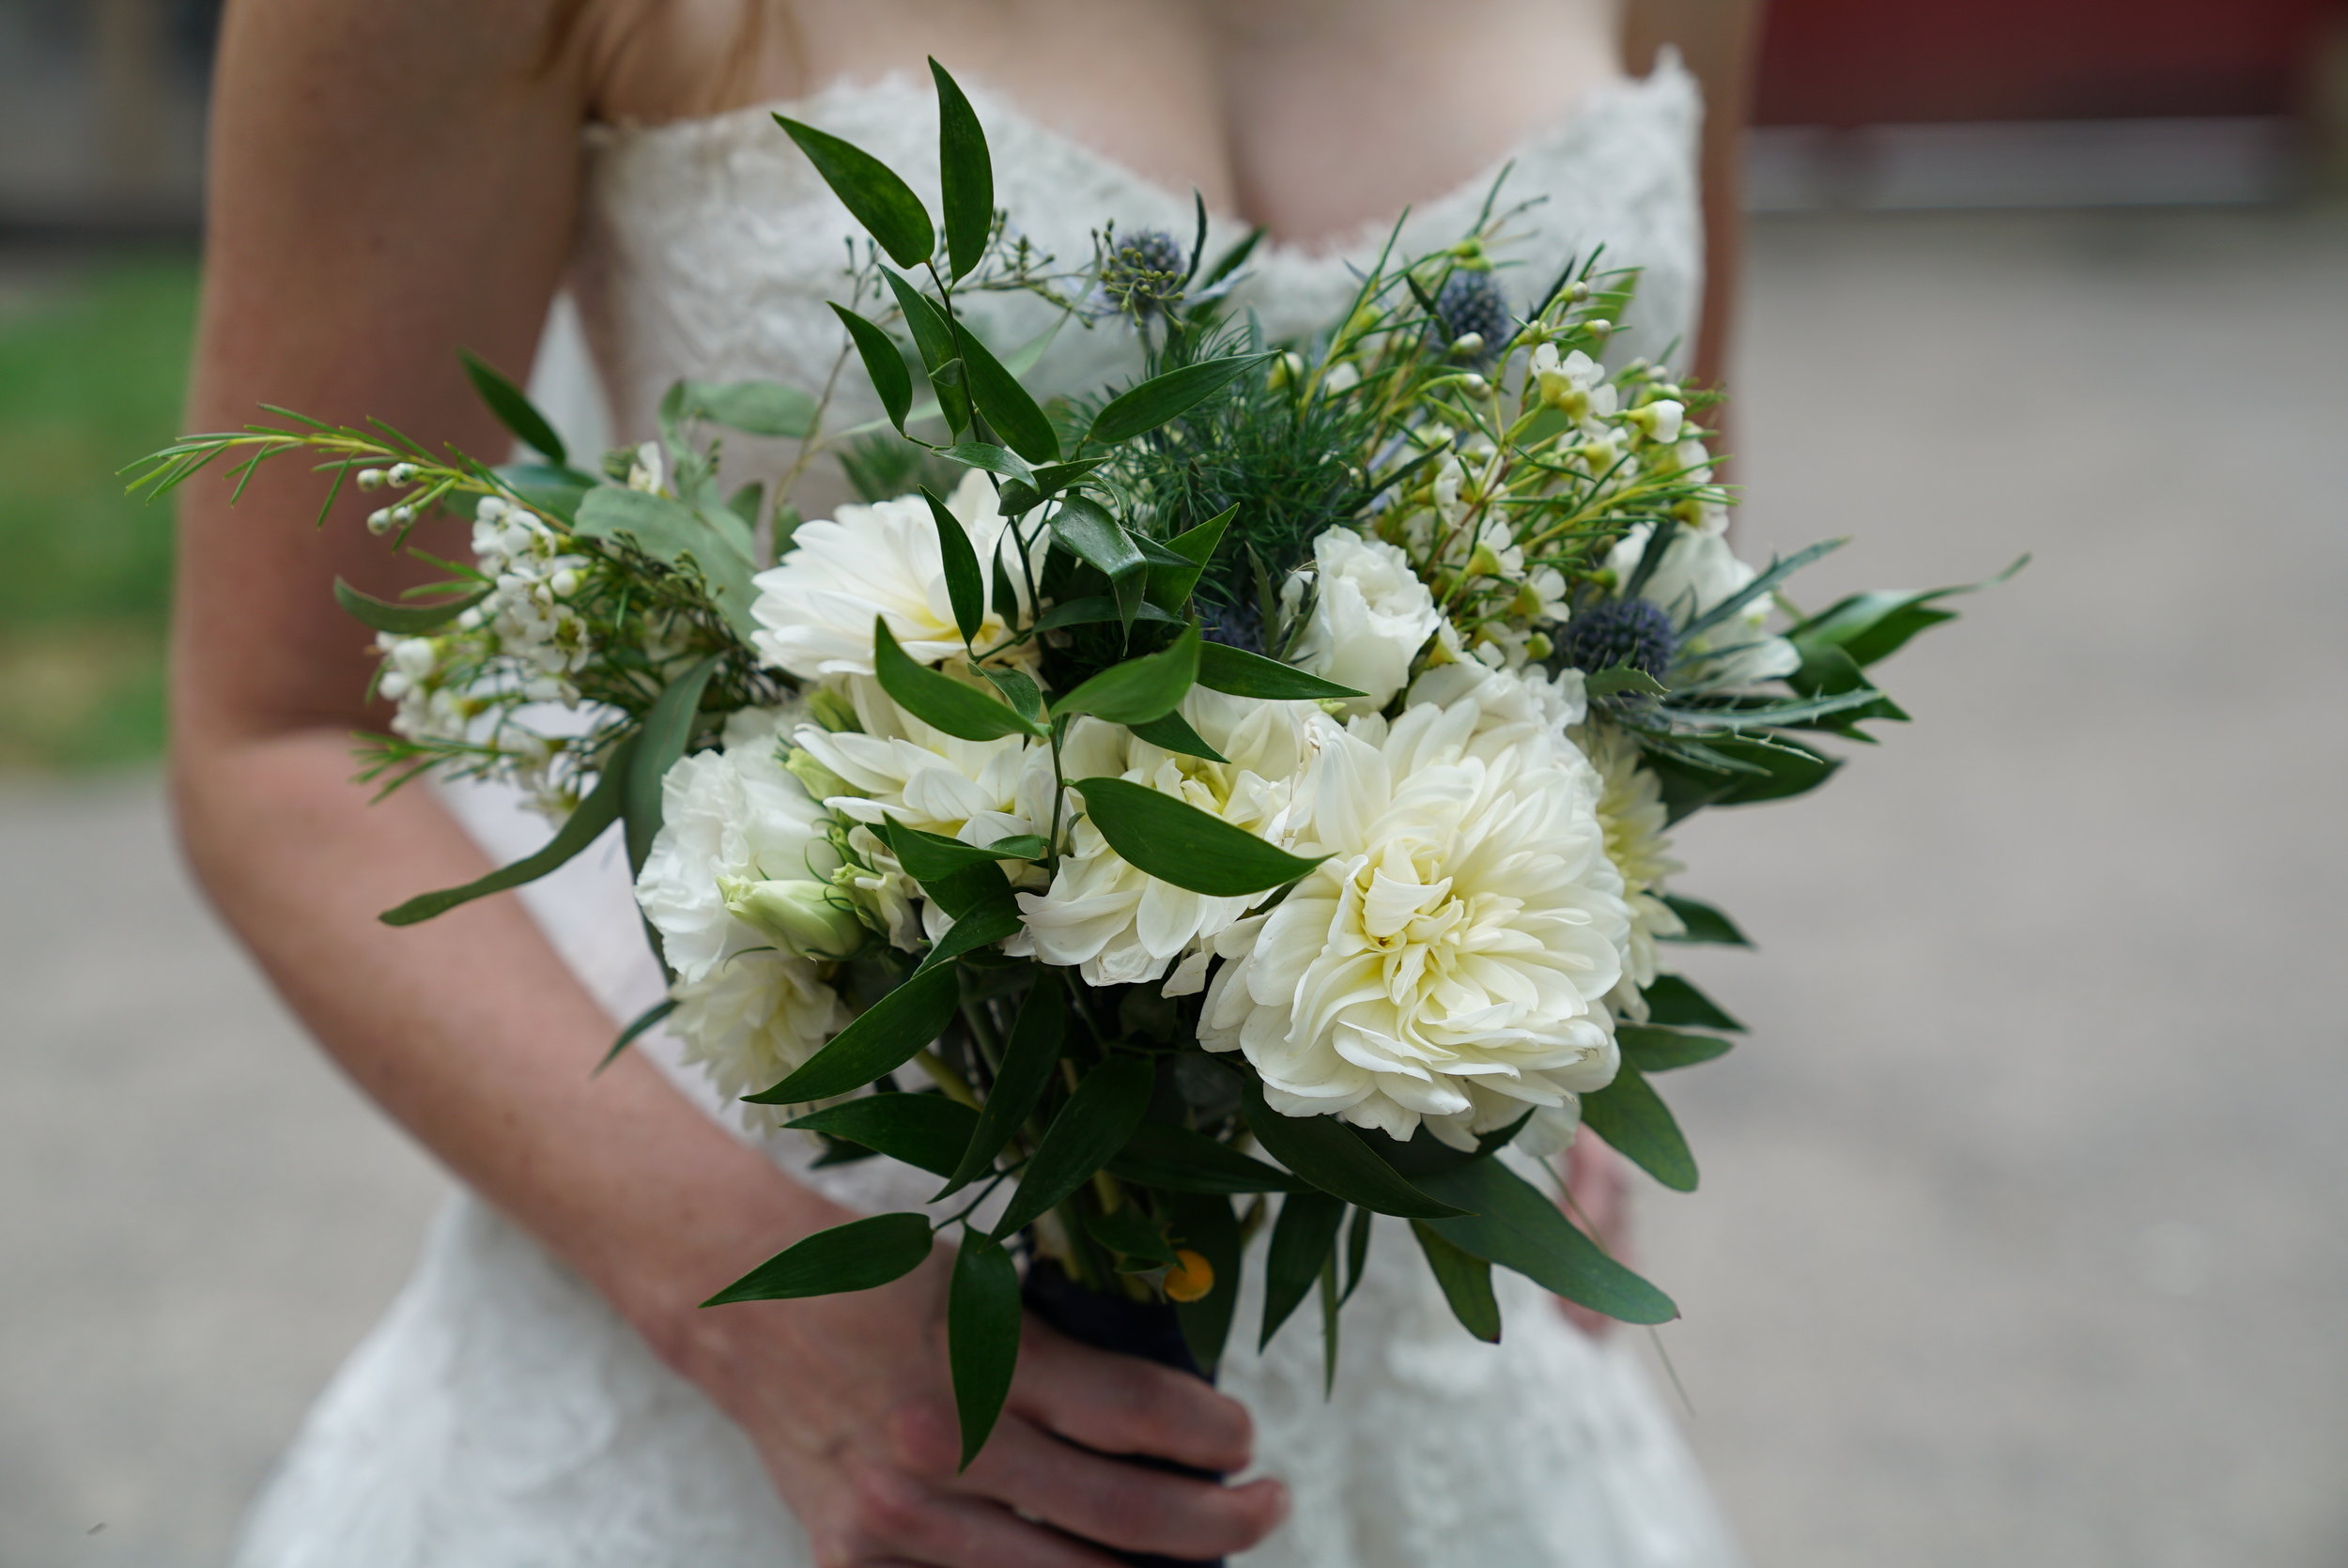  It's always hard to stop adding flowers into a bouquet, but with the bride being petite I wanted a nicely proportioned grouping. Again, Italian Ruscus shines as the dark green,&nbsp;with some Seeded Eucalyptus to lighten it up. I wish there were mor